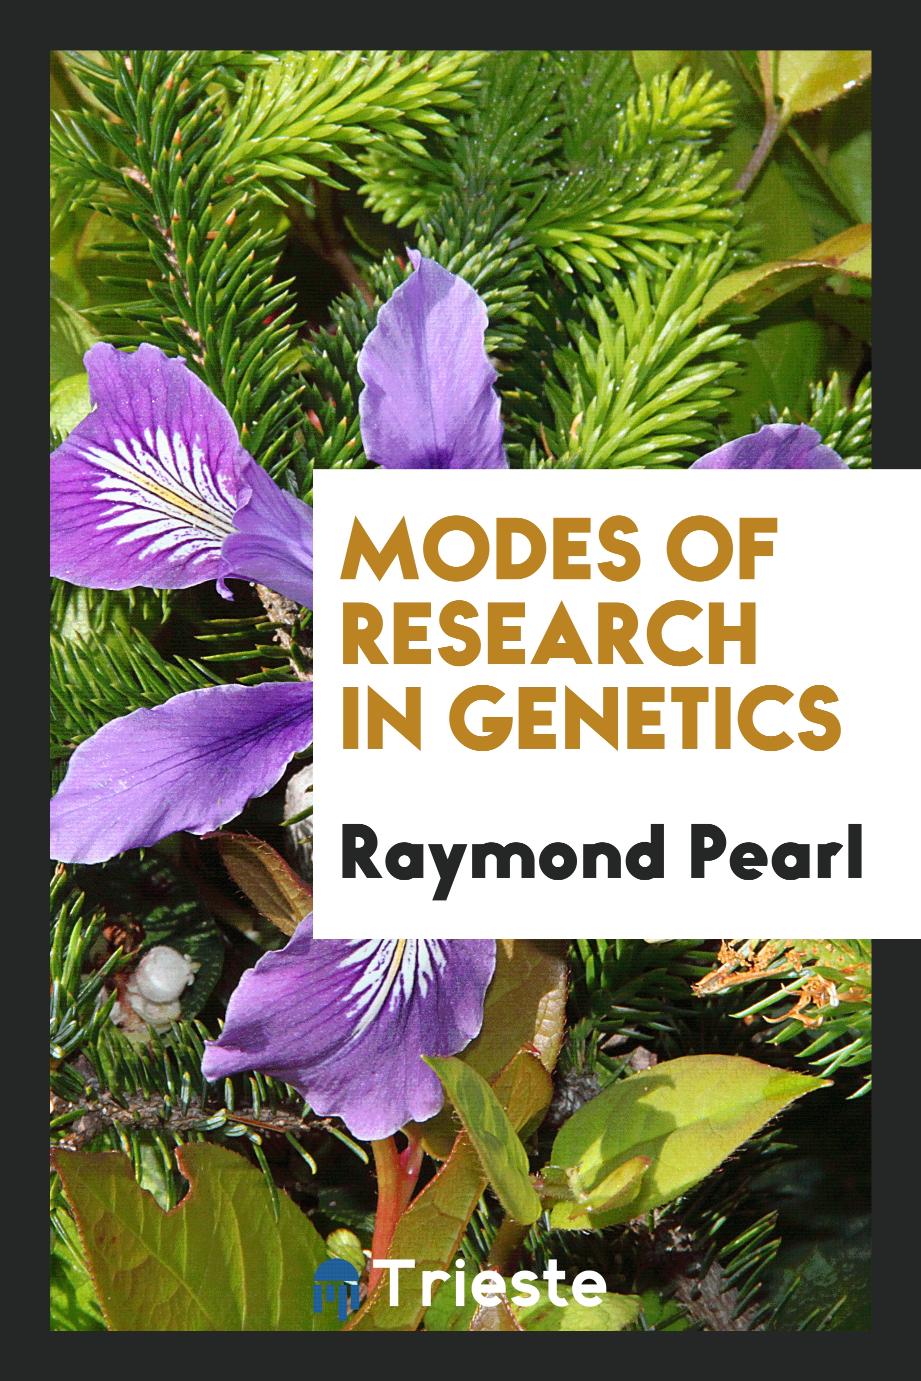 Modes of research in genetics